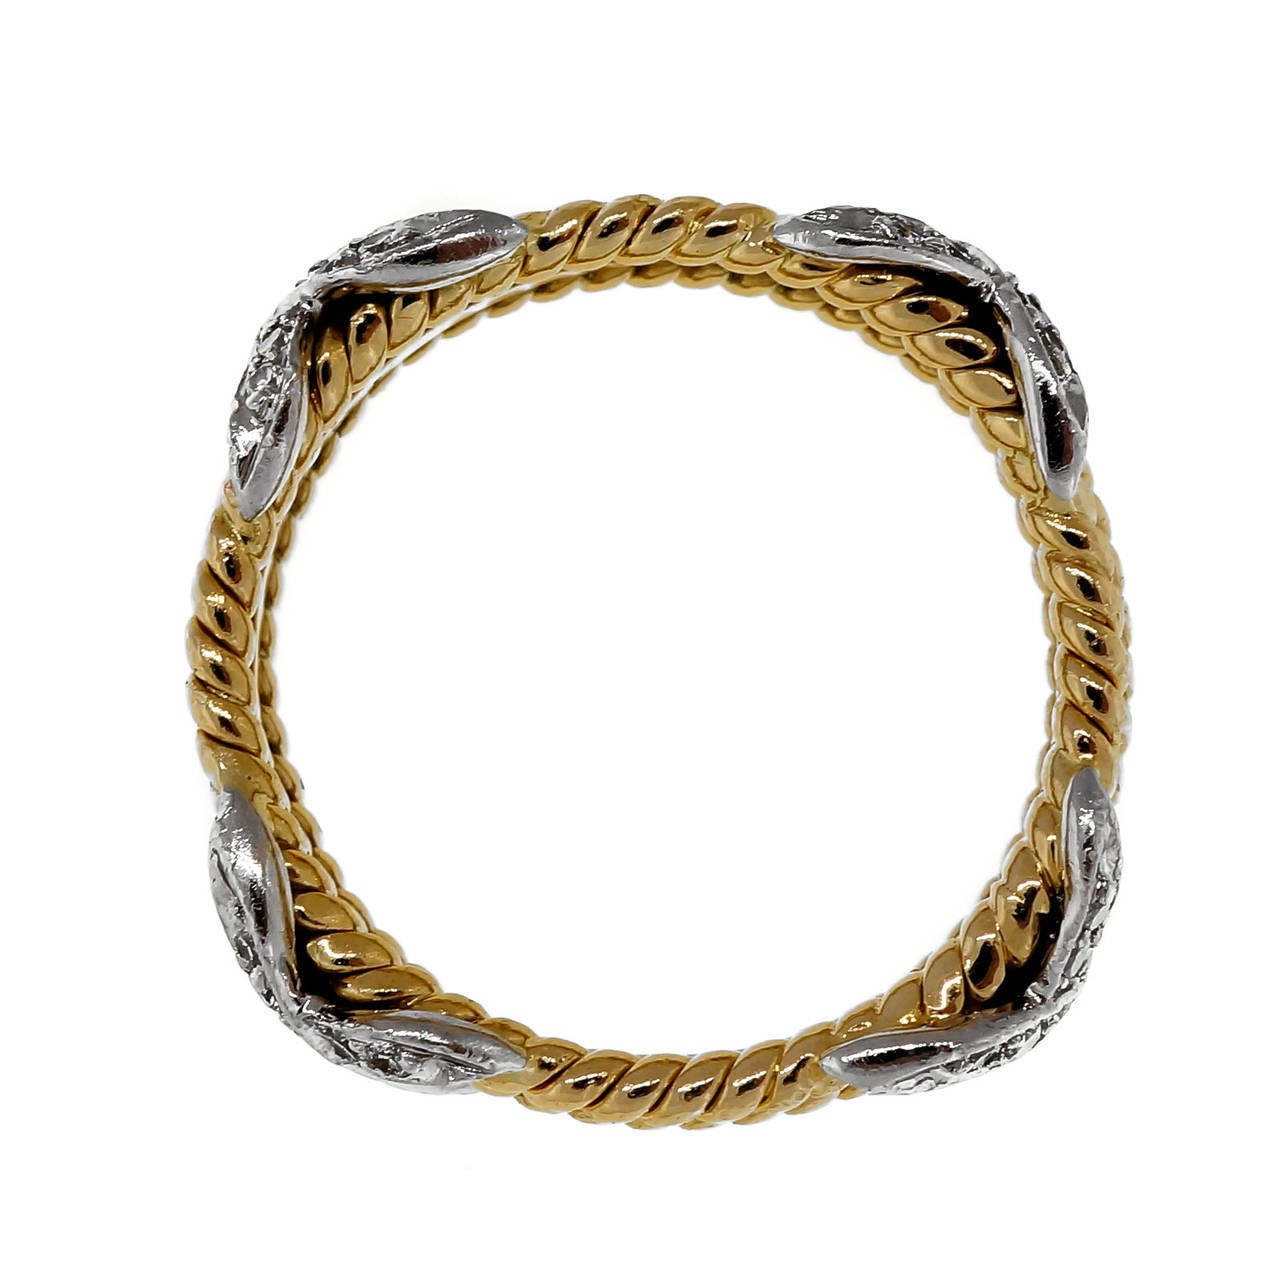 Tiffany & Co Schlumberger Diamond and Yellow Gold Platinum three row “X”  rope ring.

36 round diamonds, approx. total weight .28cts, F-G, VS
18k yellow gold and Platinum
7.1 grams
Tested: 18k & Platinum
Stamped: 750 PT 950
Hallmark: Tiffany